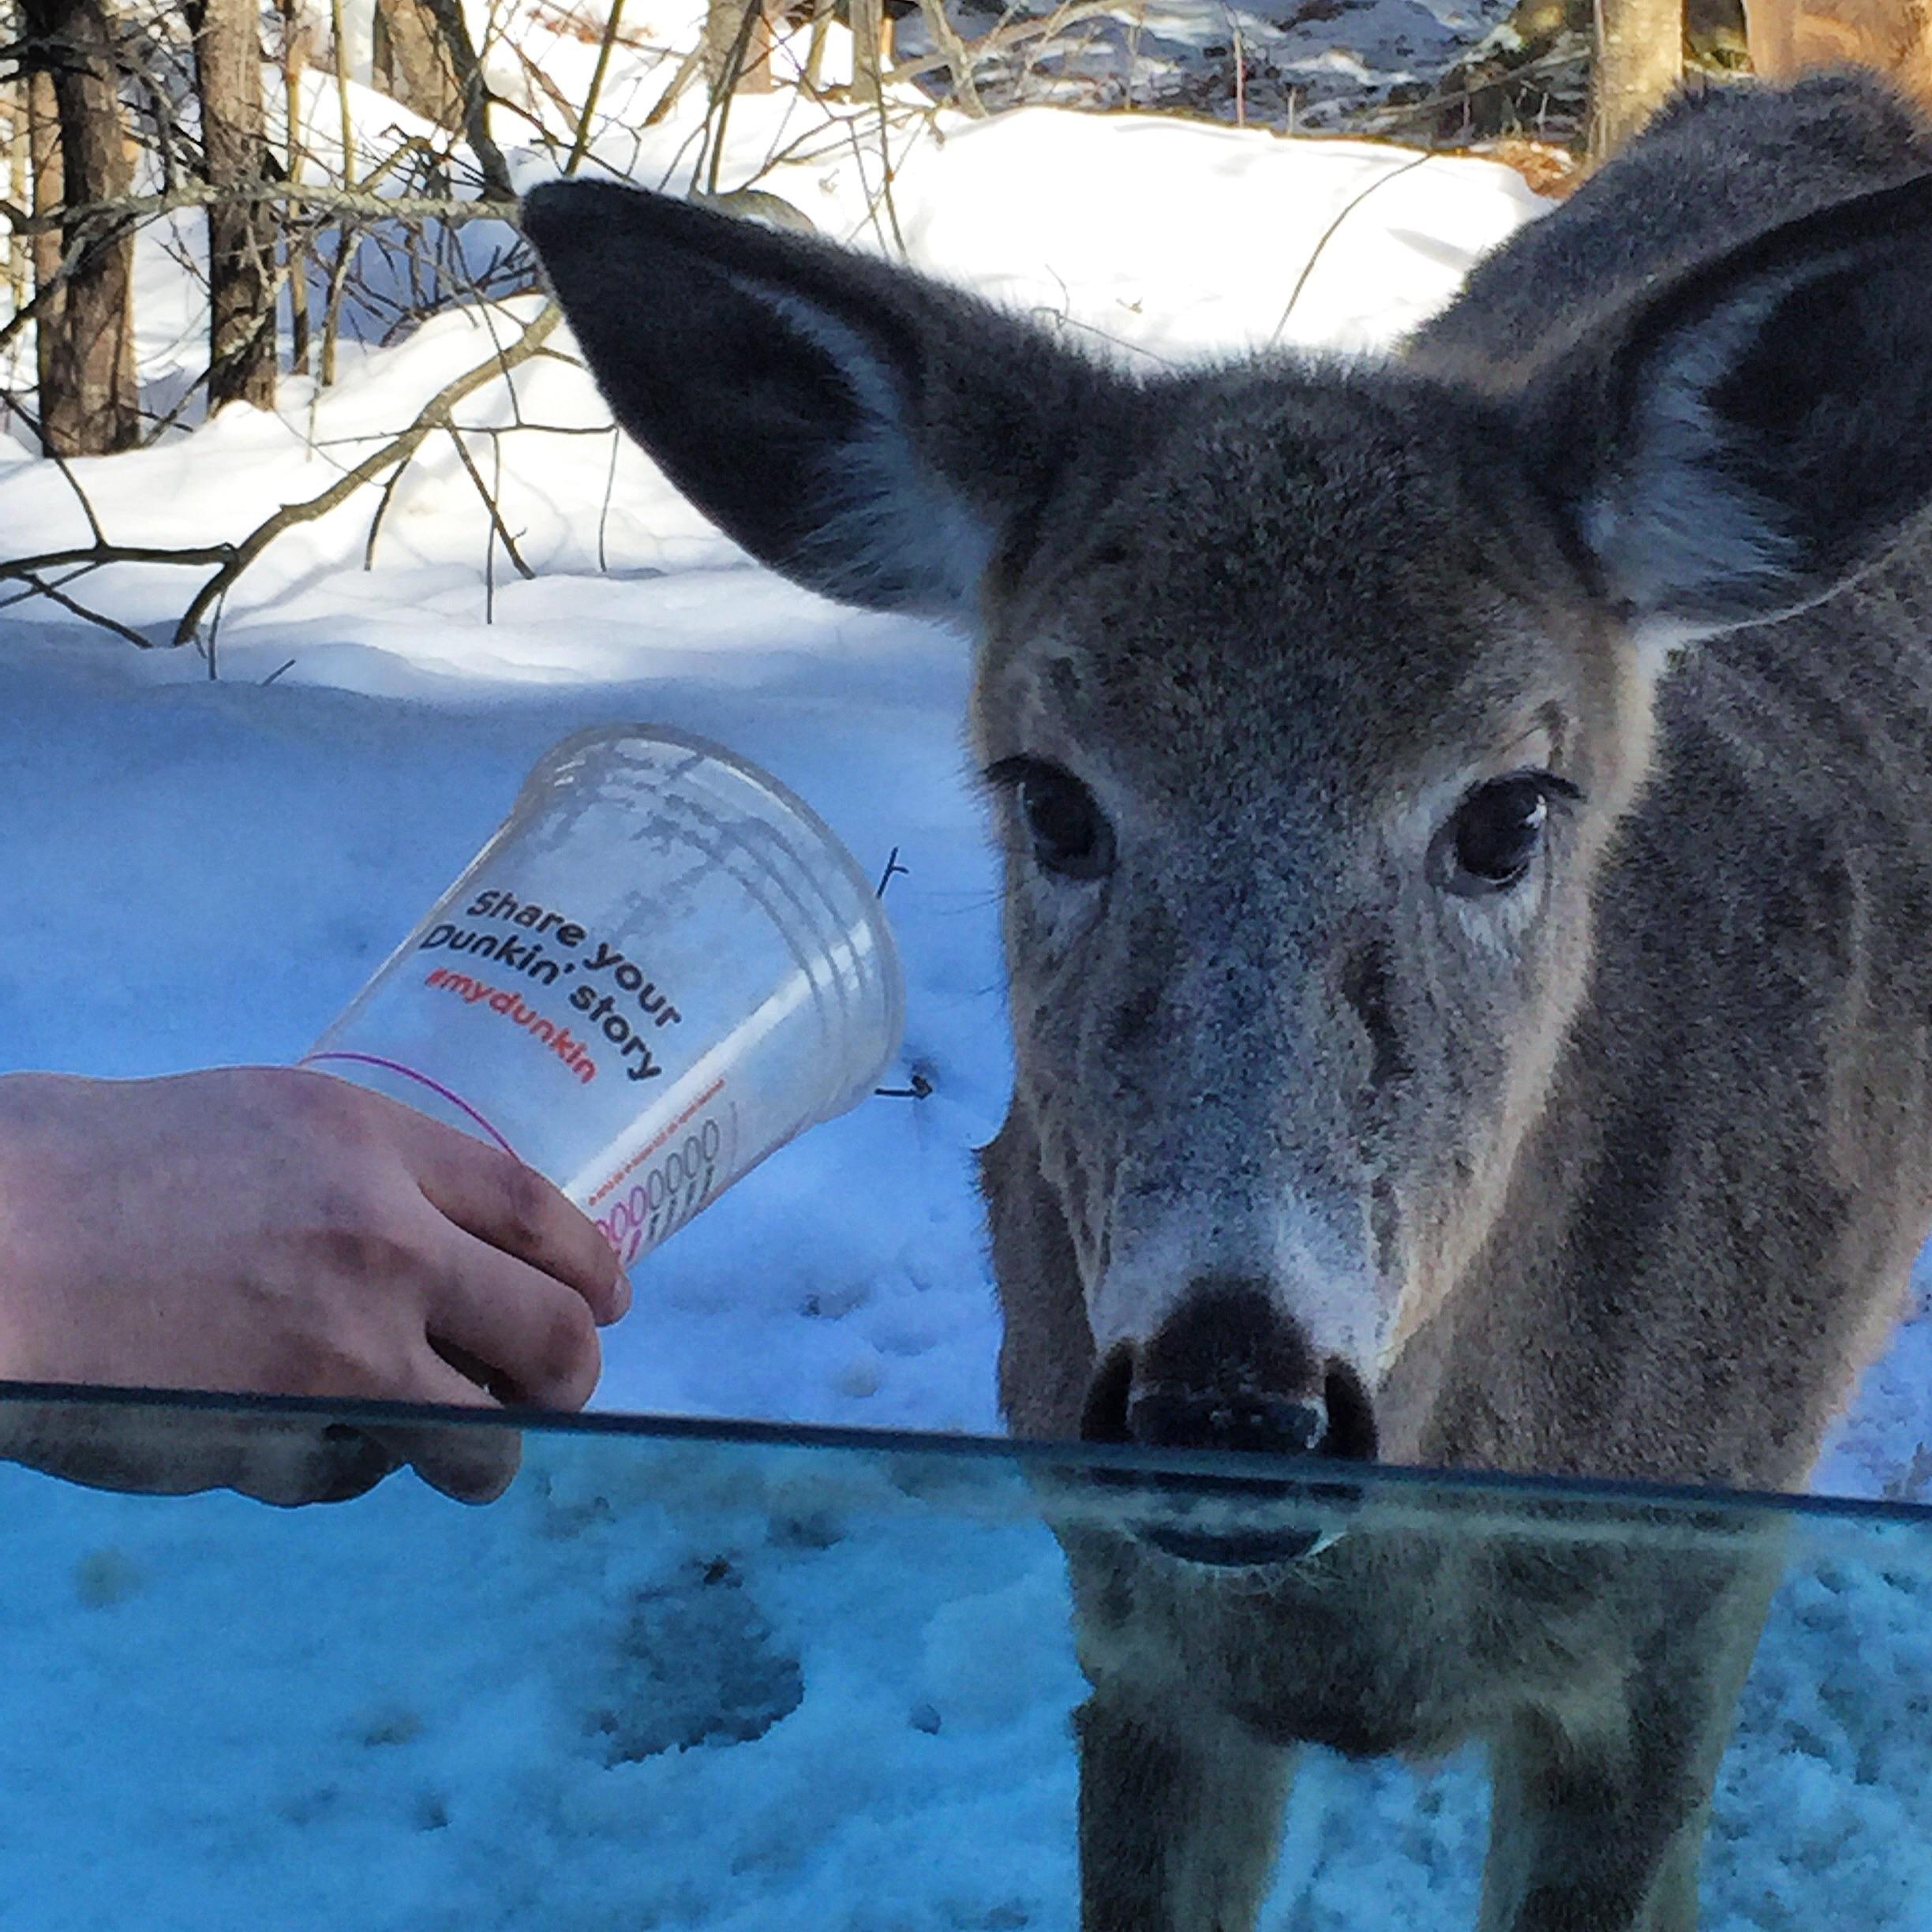 The day we shared our coolattas with a band of wild deer #deersquad ...